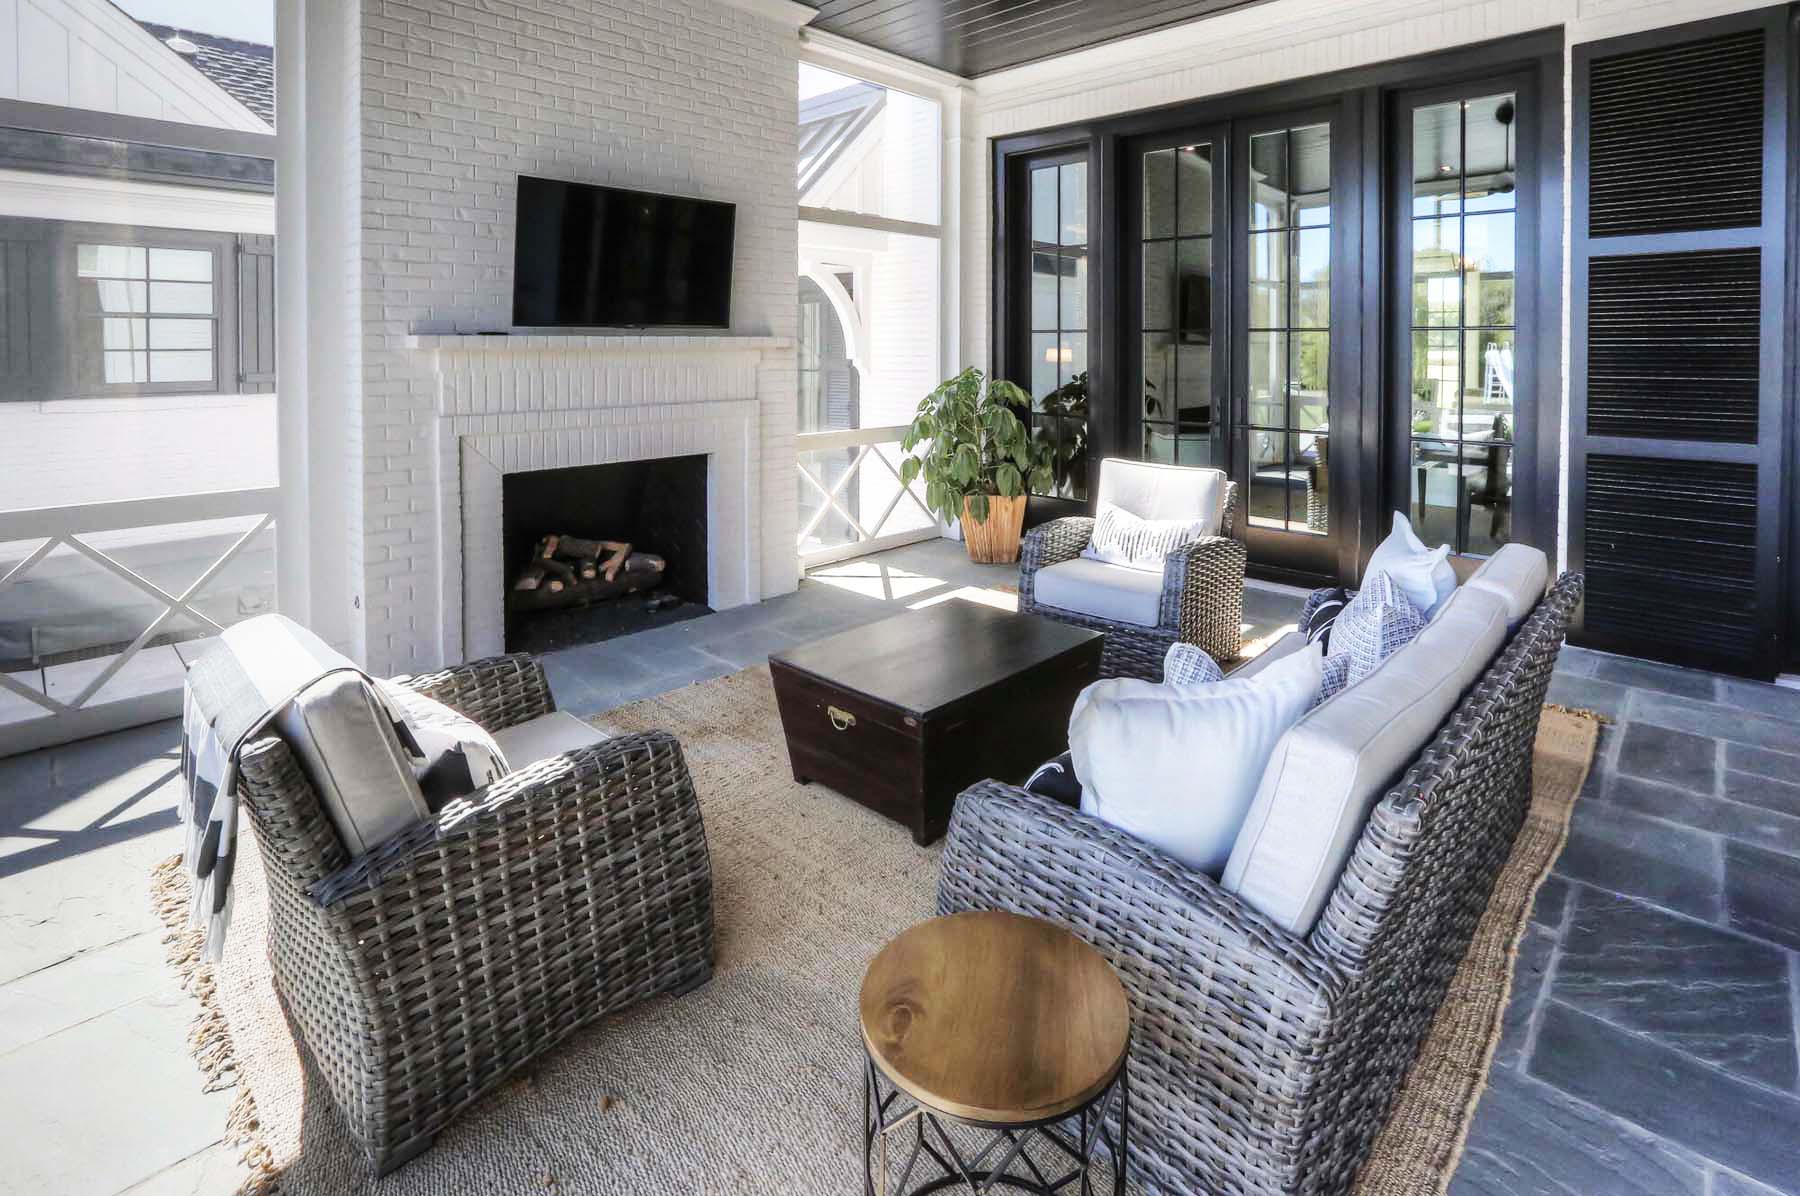 Best Fireplace Surround Ideas Mantel, White Brick Outdoor Fireplaces